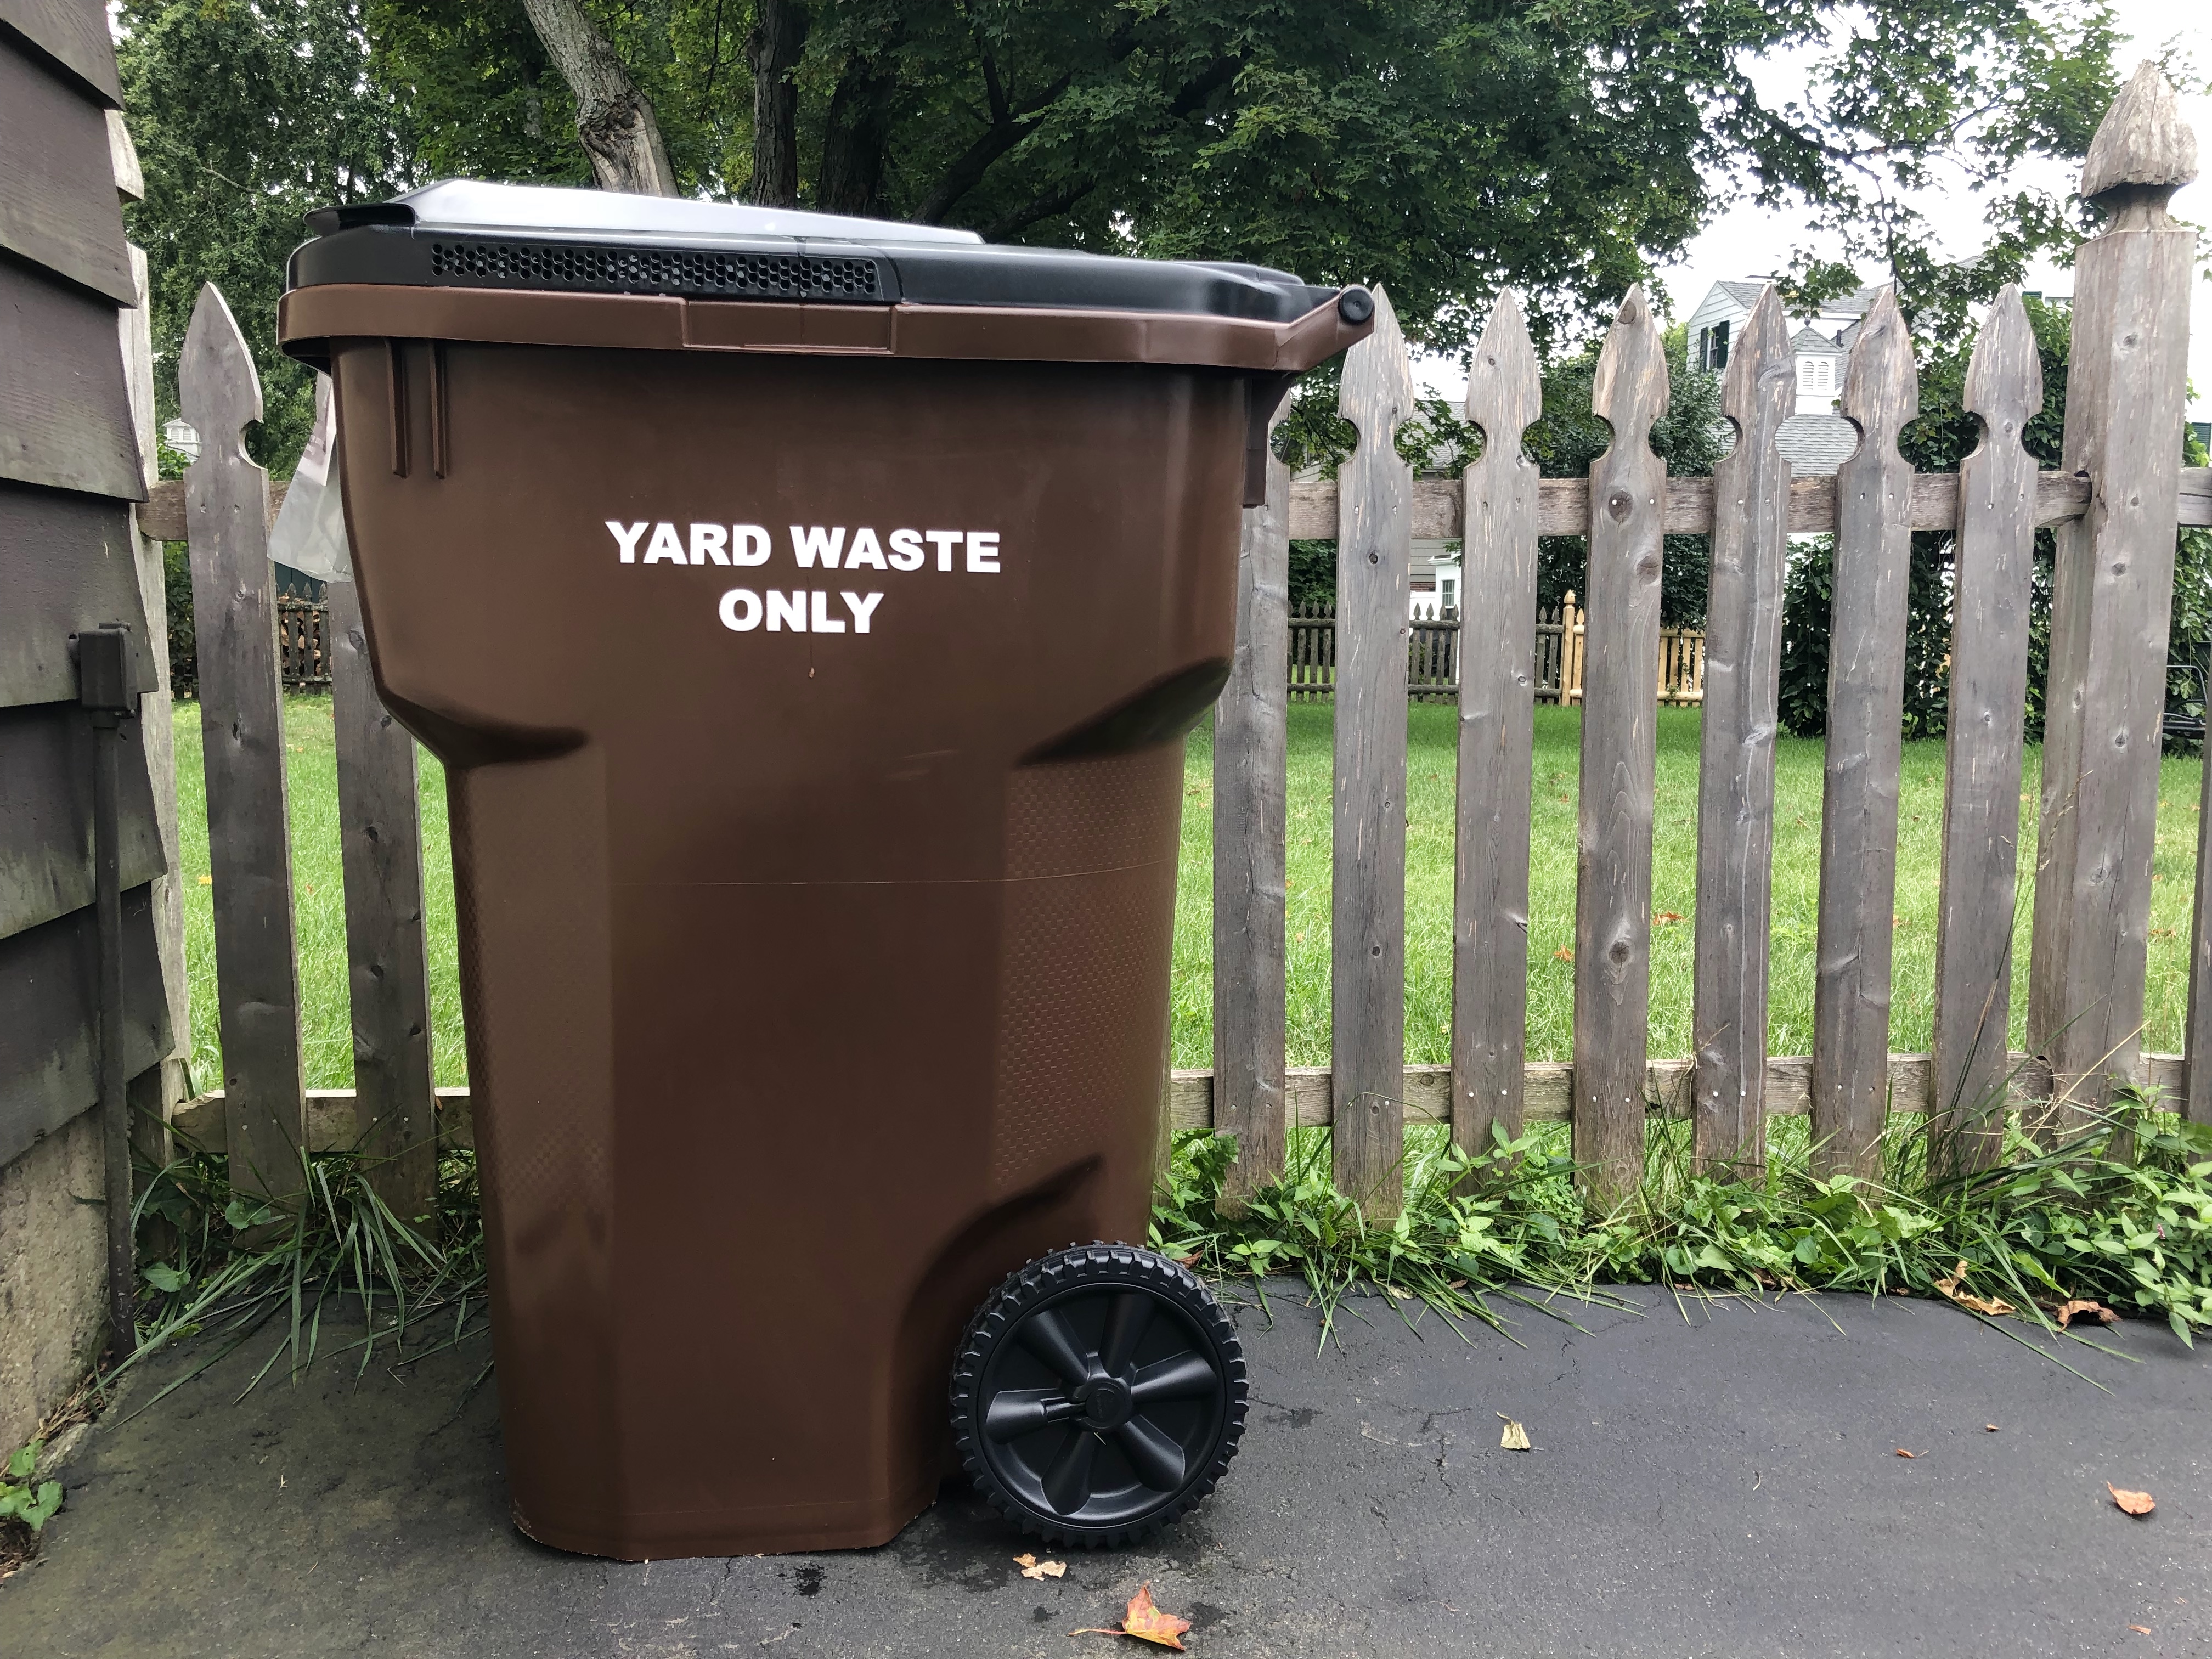 San Marcos rolling out smaller trash bins, new yard waste carts